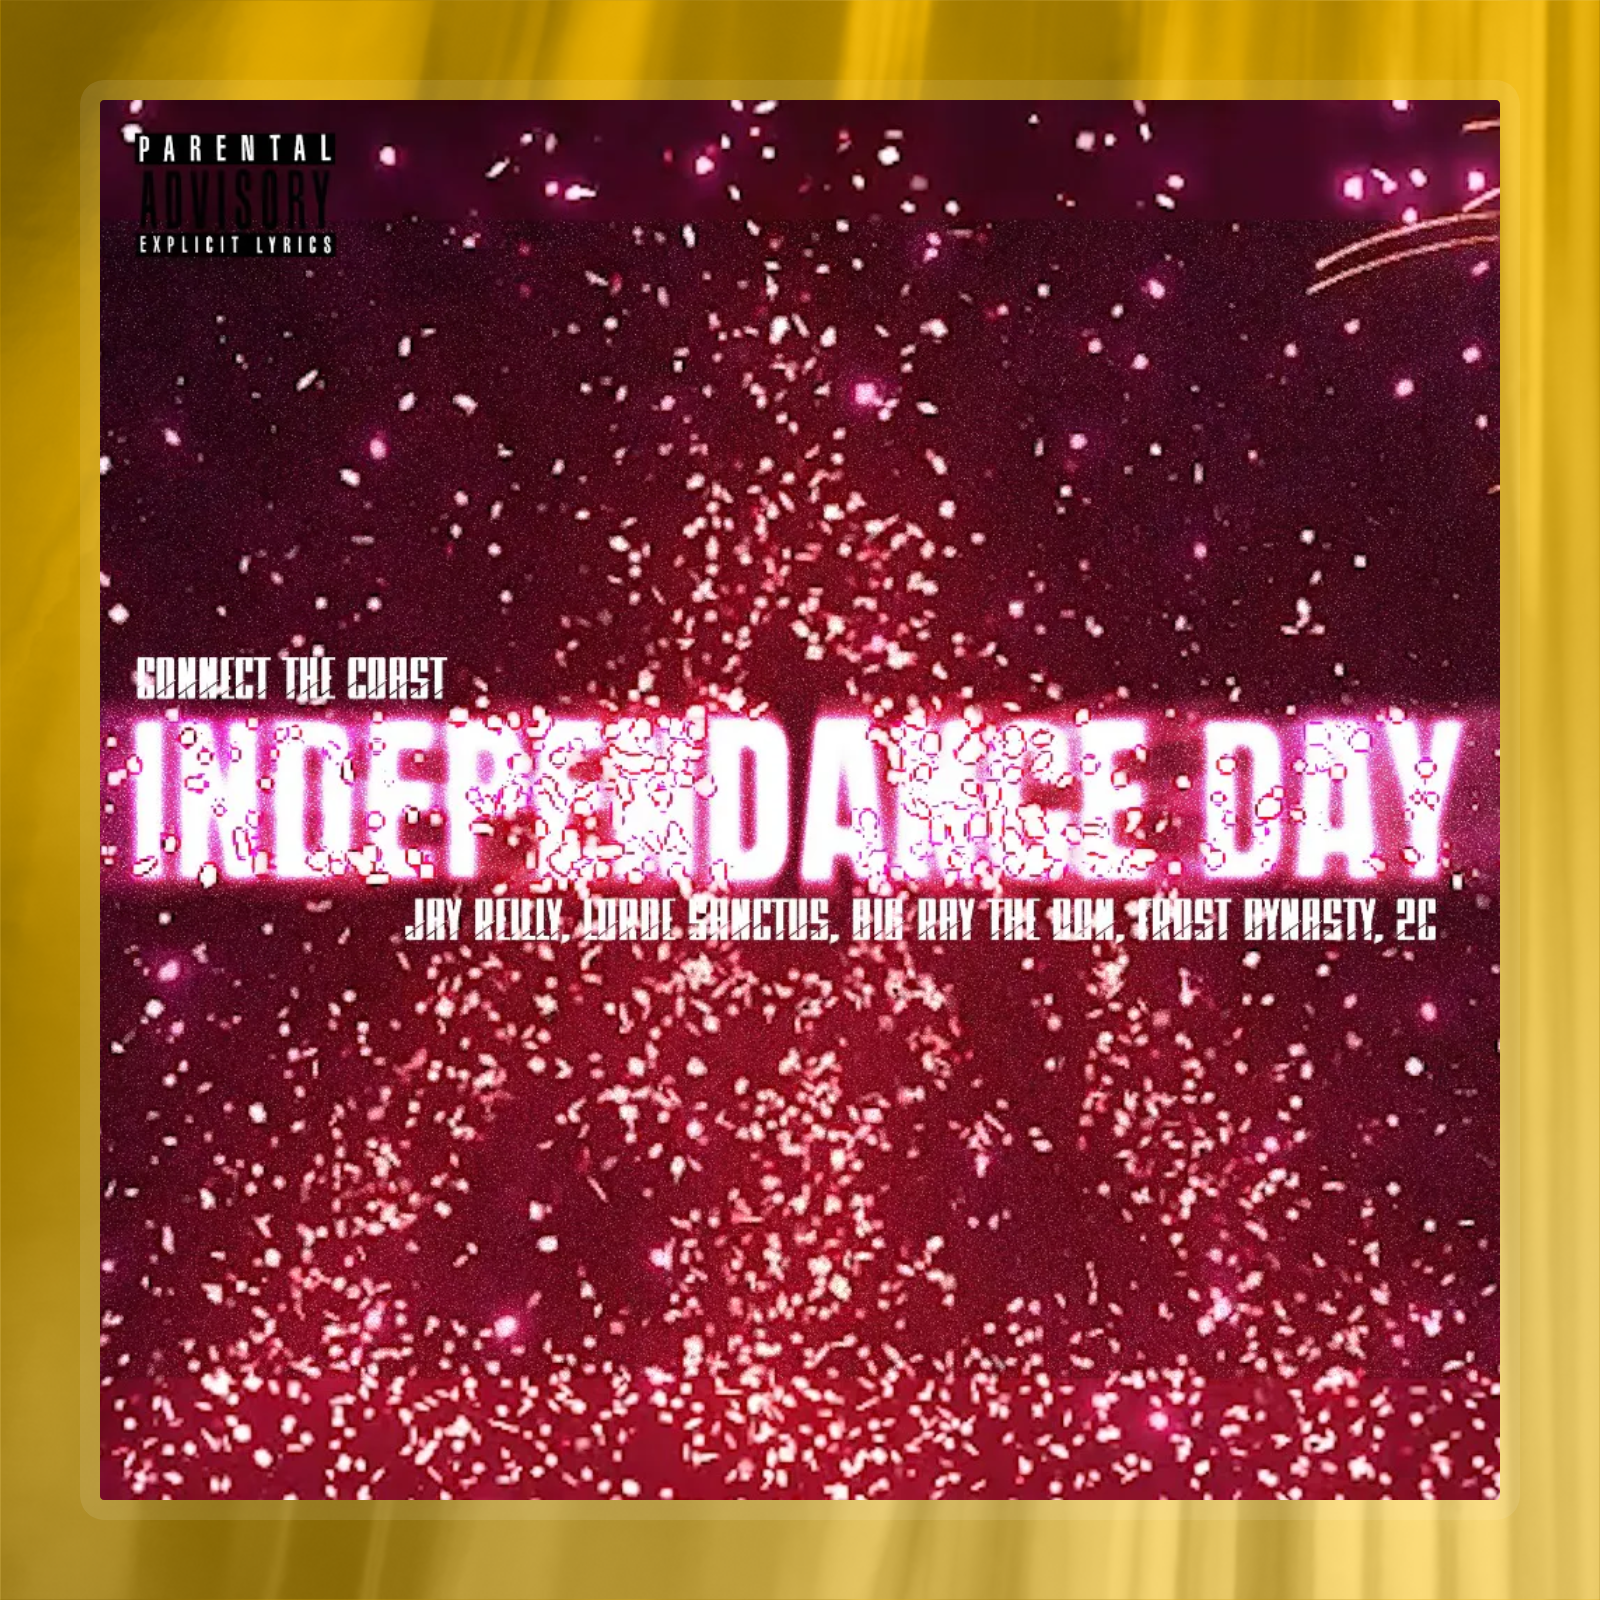 Independance Day featuring Jay Reilly, Lorde Sanctus, Big Ray The Don, frost dynasty, vuve le, and 2c